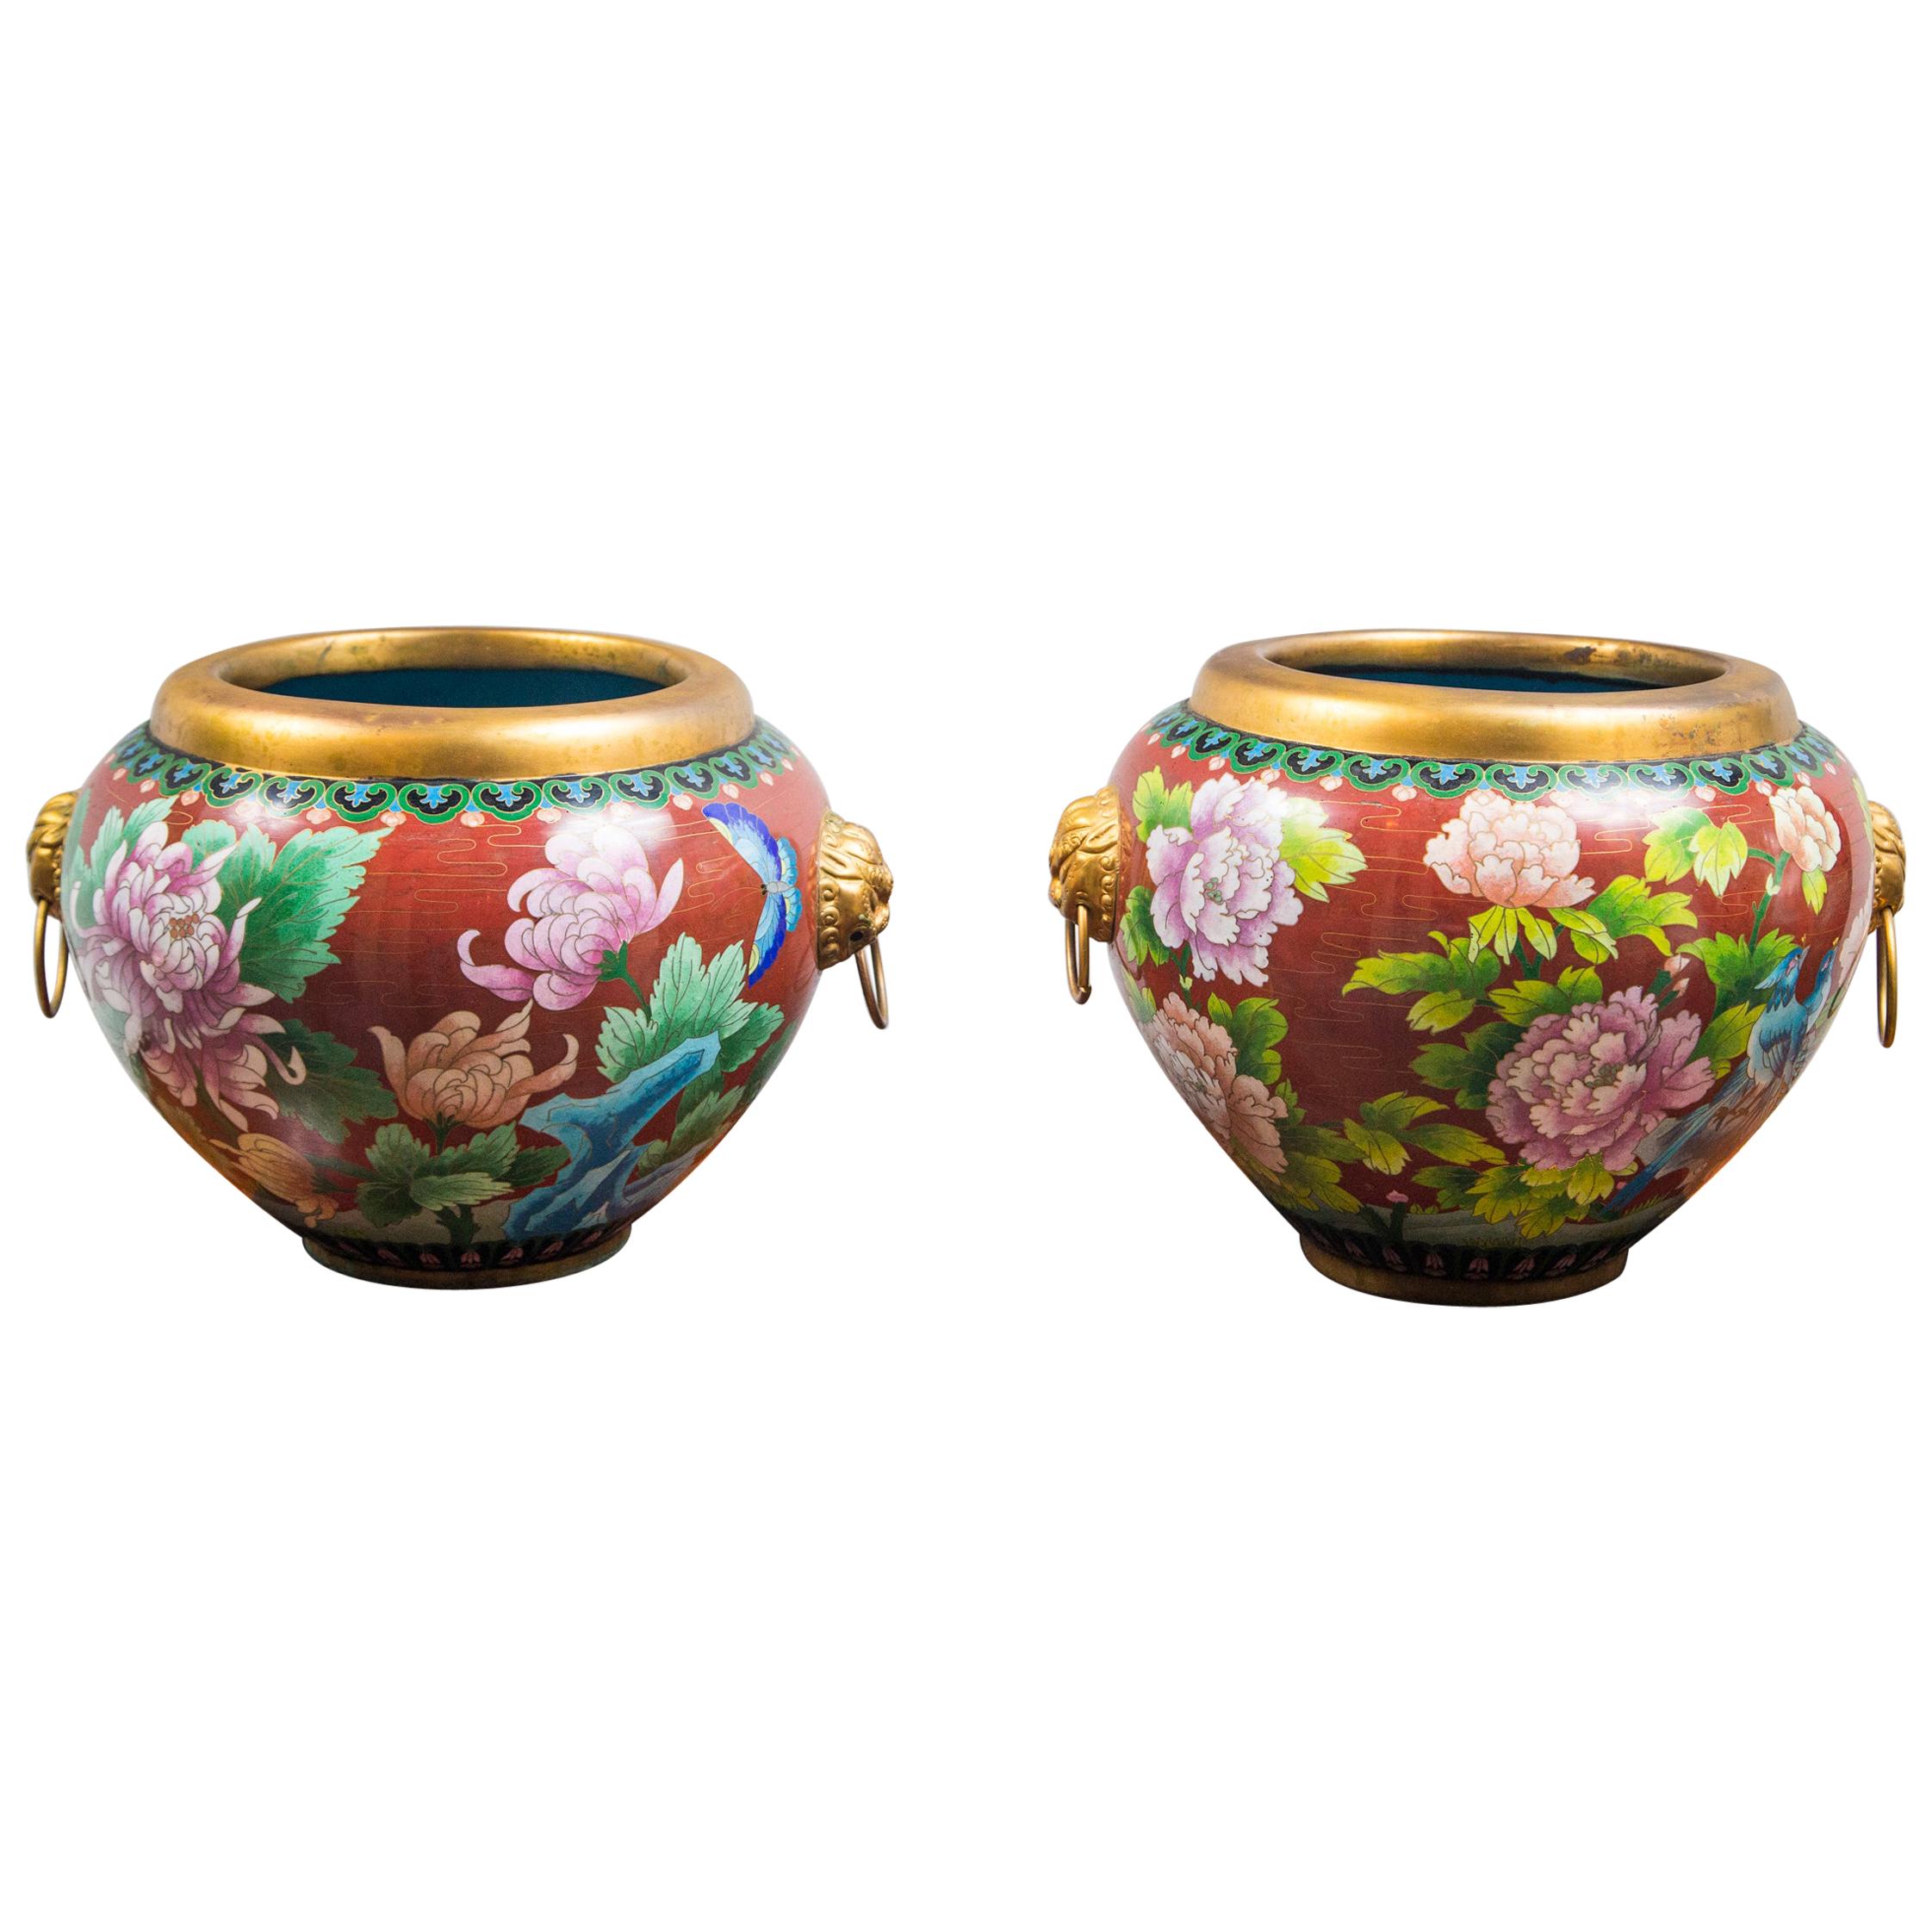 Pair of Chinese Cloisonné Round